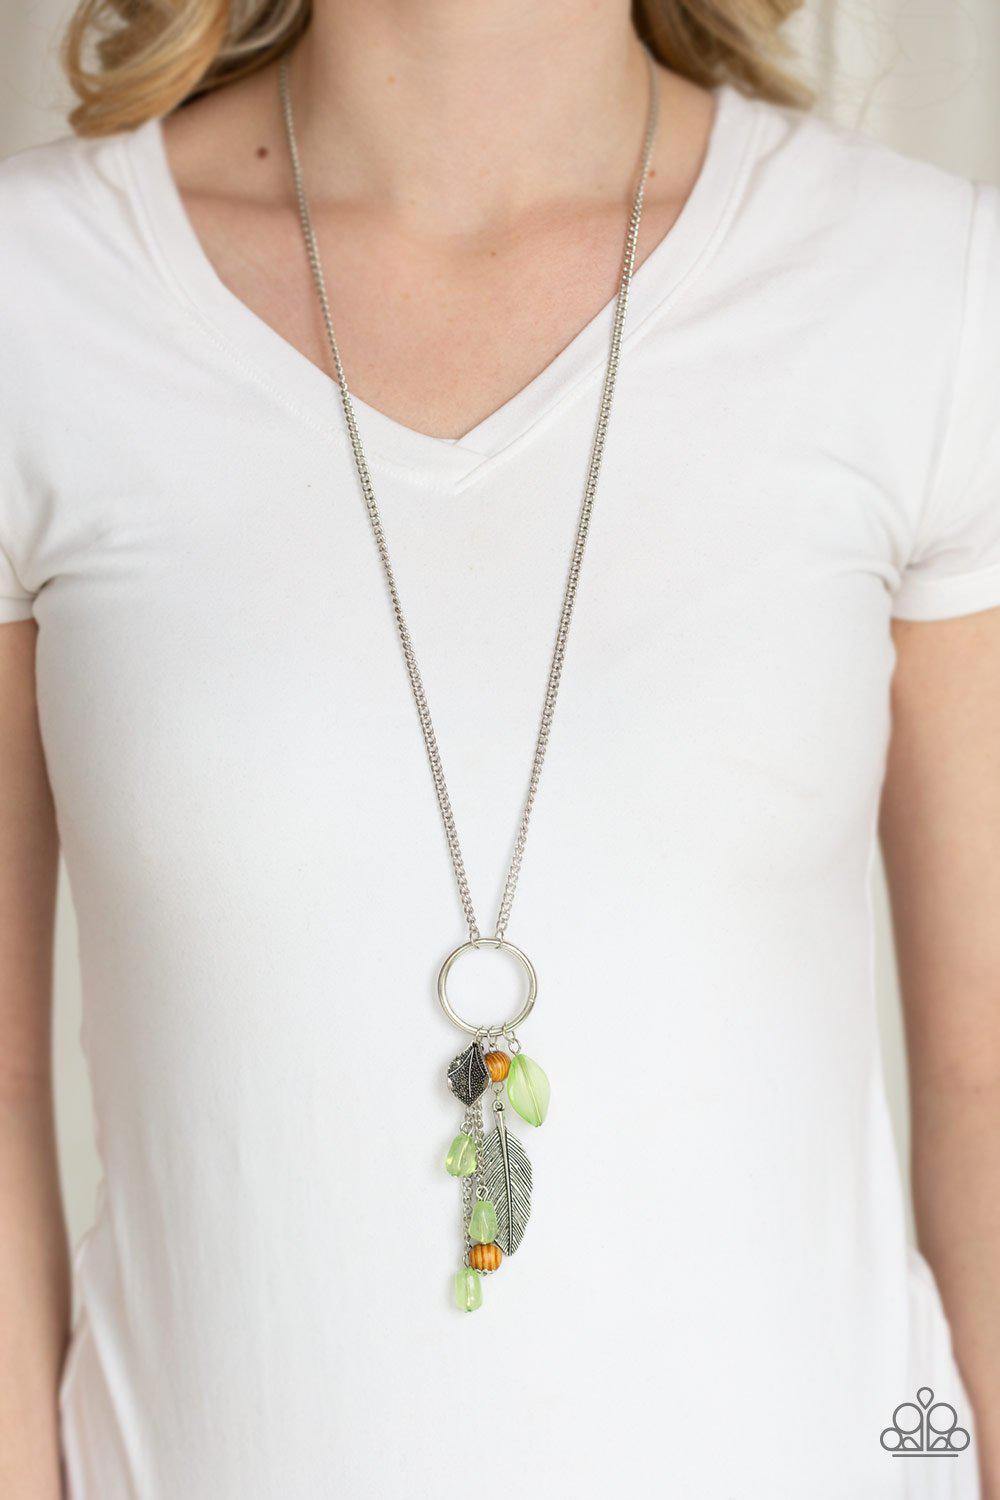 Sky High Style Green and Silver Feather Charm Necklace - Paparazzi Accessories-CarasShop.com - $5 Jewelry by Cara Jewels